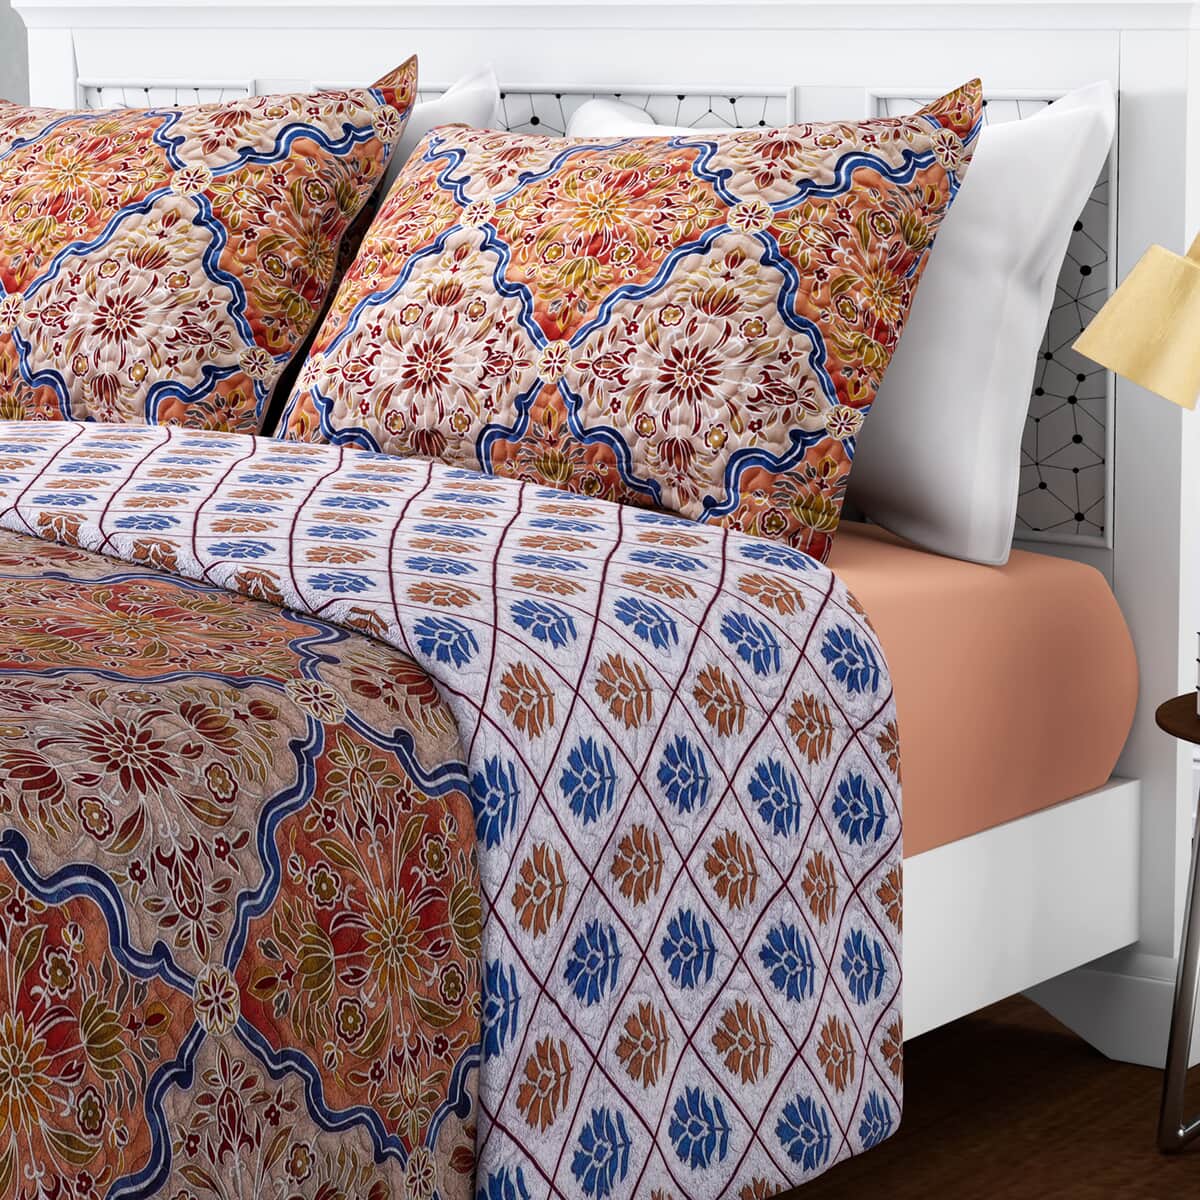 HOMESMART Orange and Blue Printed Microfiber Quilt (Queen) and Set of 2 Shams image number 2